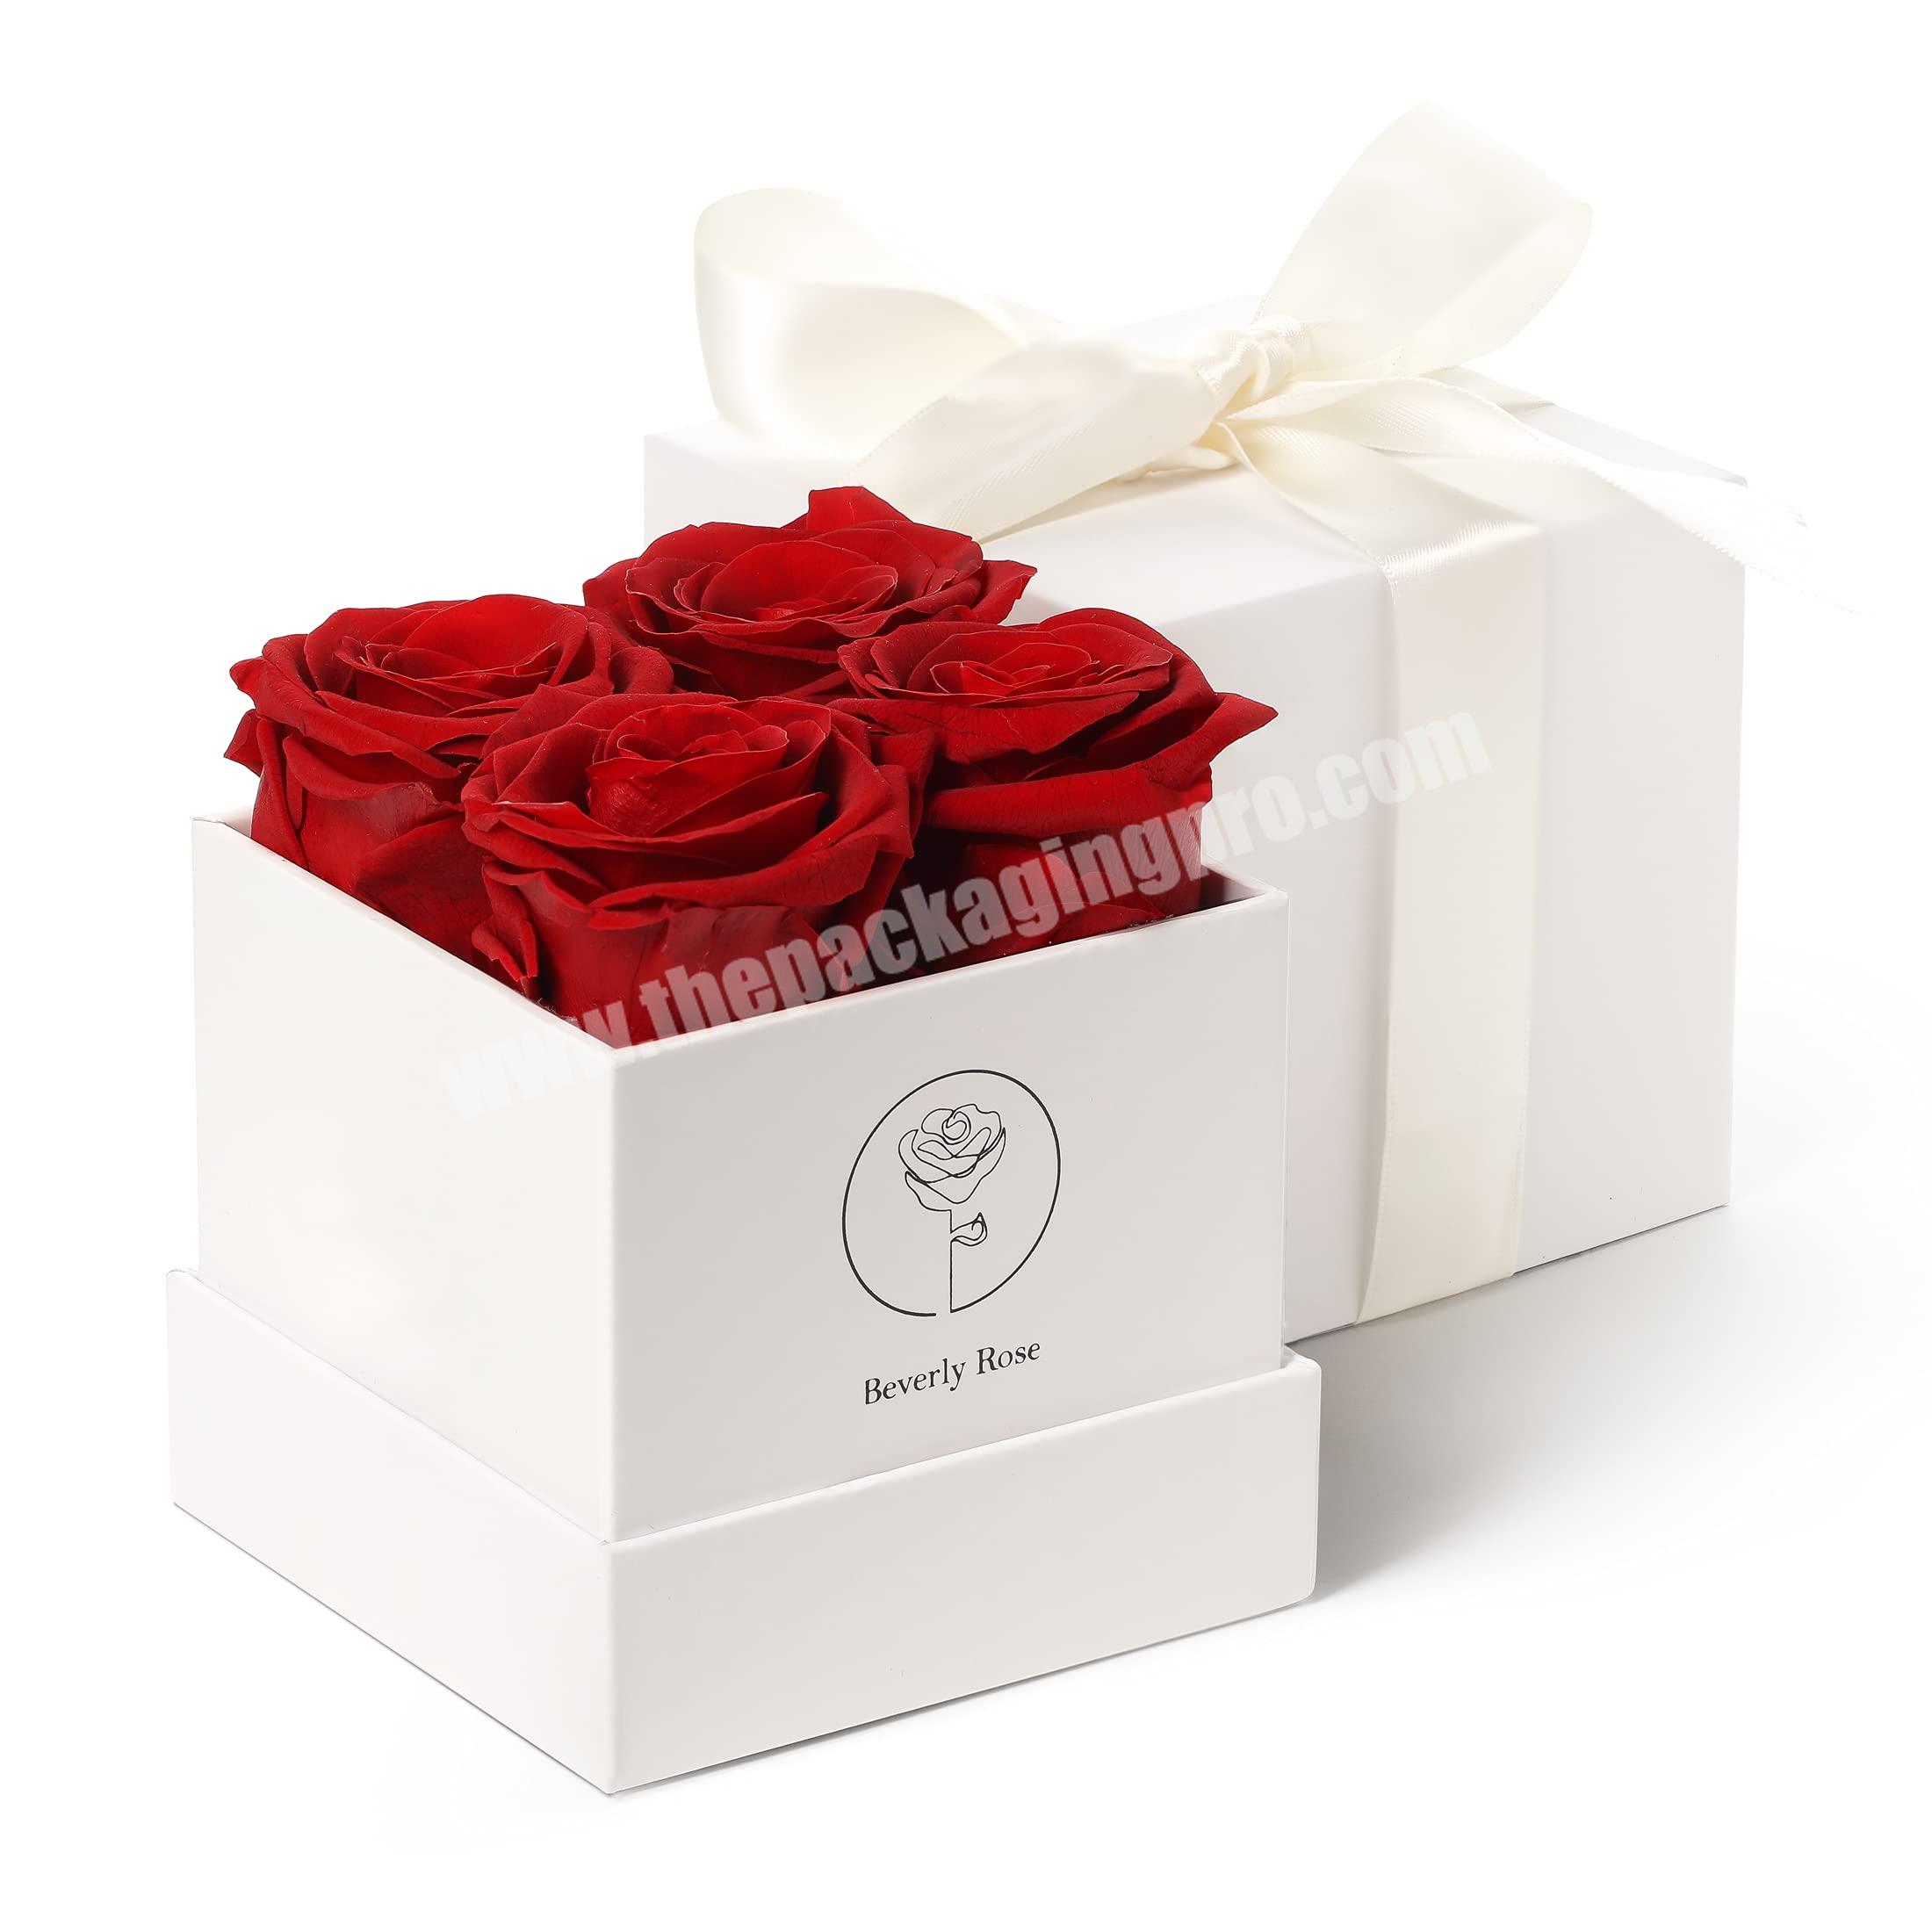 Wholesale Luxury Floral Boxes Eternal Flower Box Set Packaging For Floral Gift Shipping Box